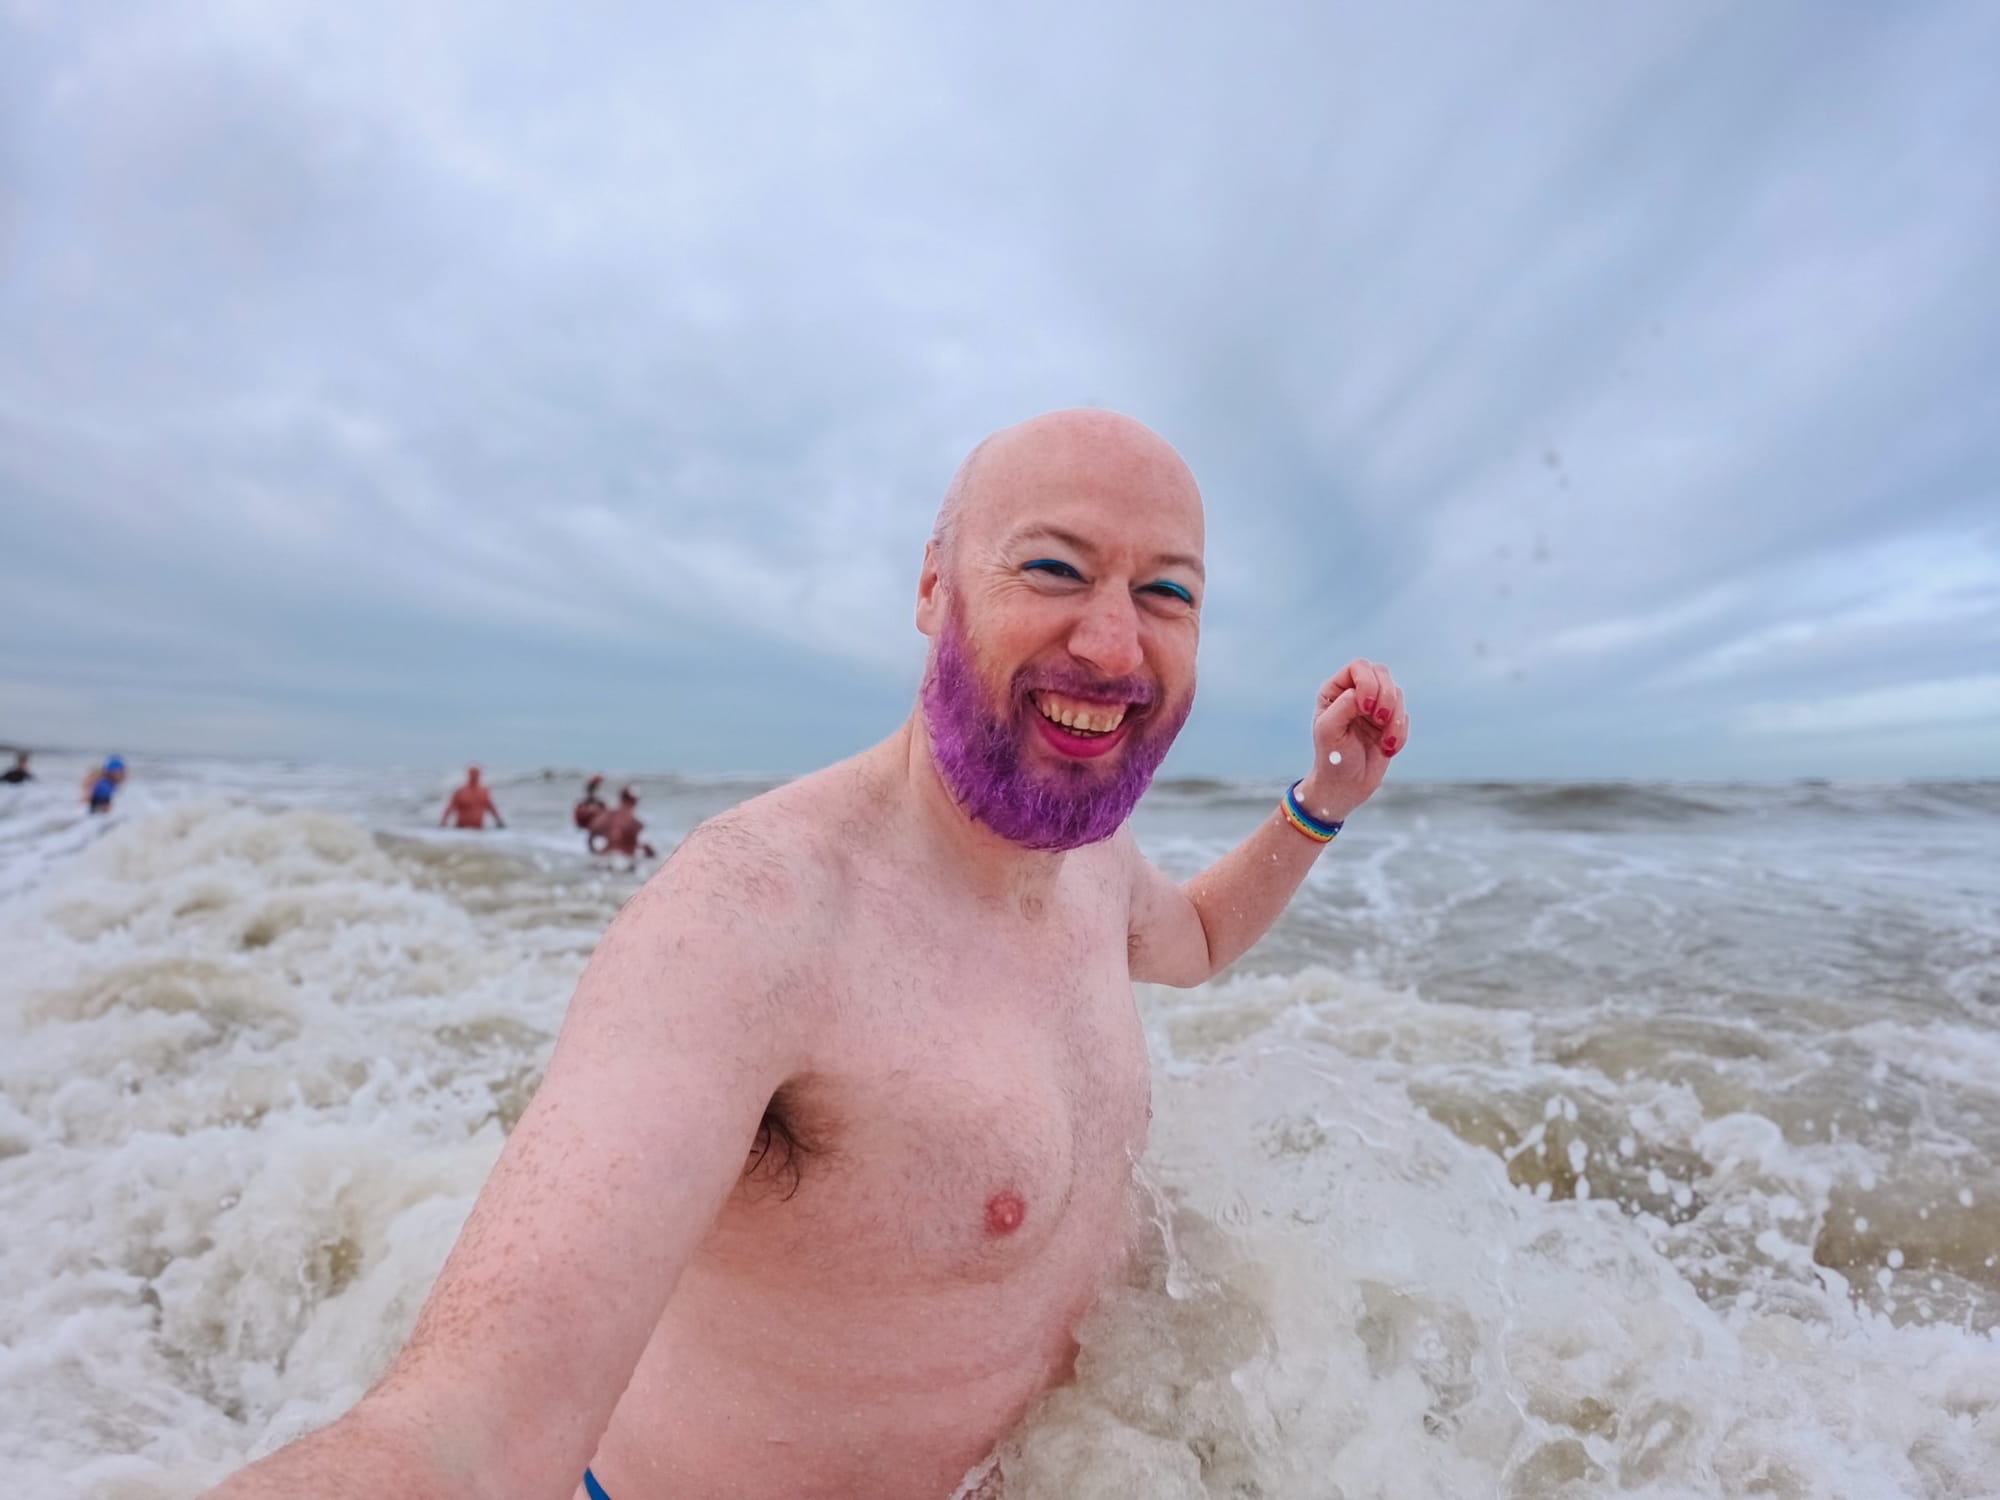 A happy non-binary person laughs as a wave crashes into them. They have a purple beard and blue eye liner on.